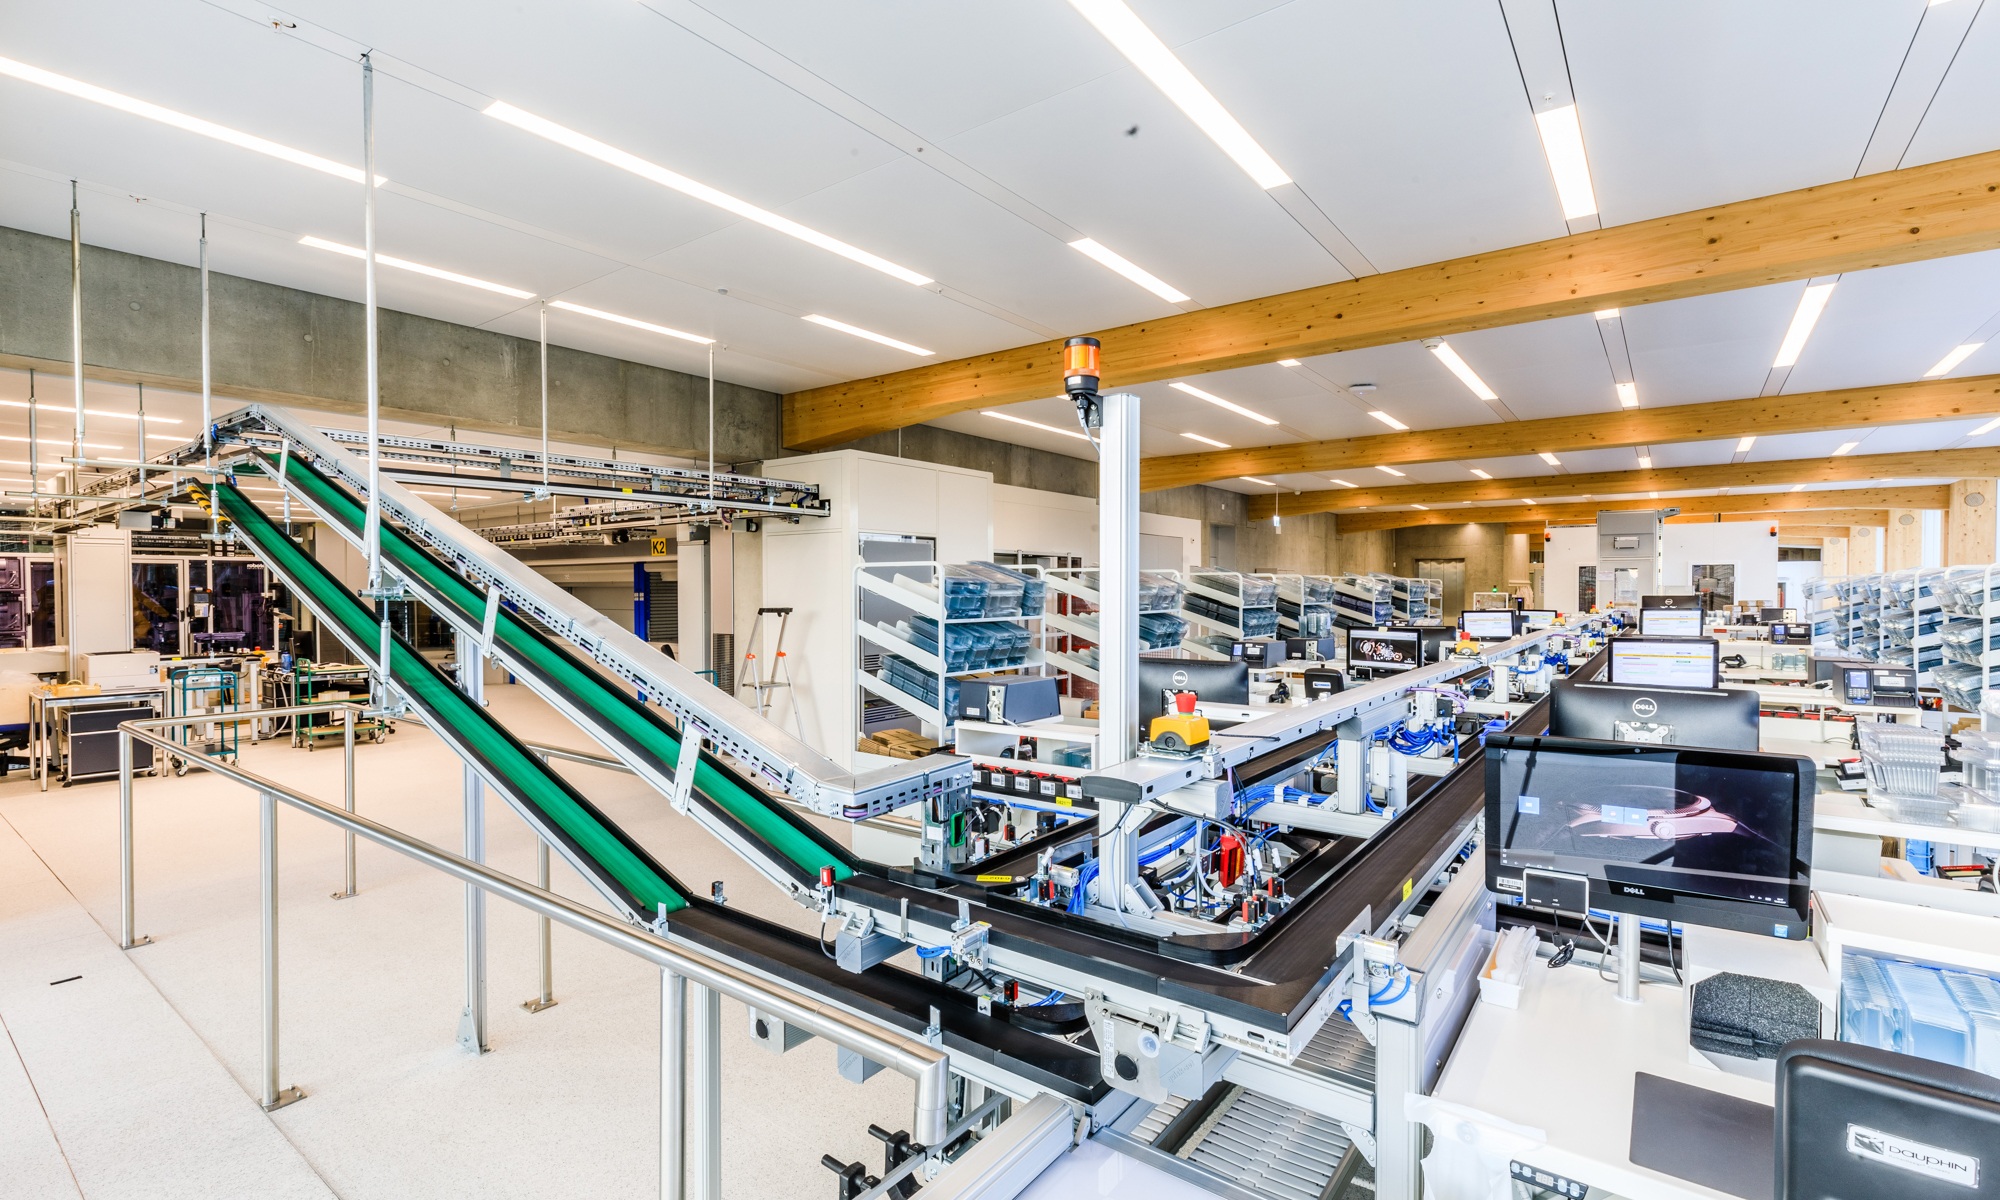 Photograph of the bright Omega production workshop with timber roof structure